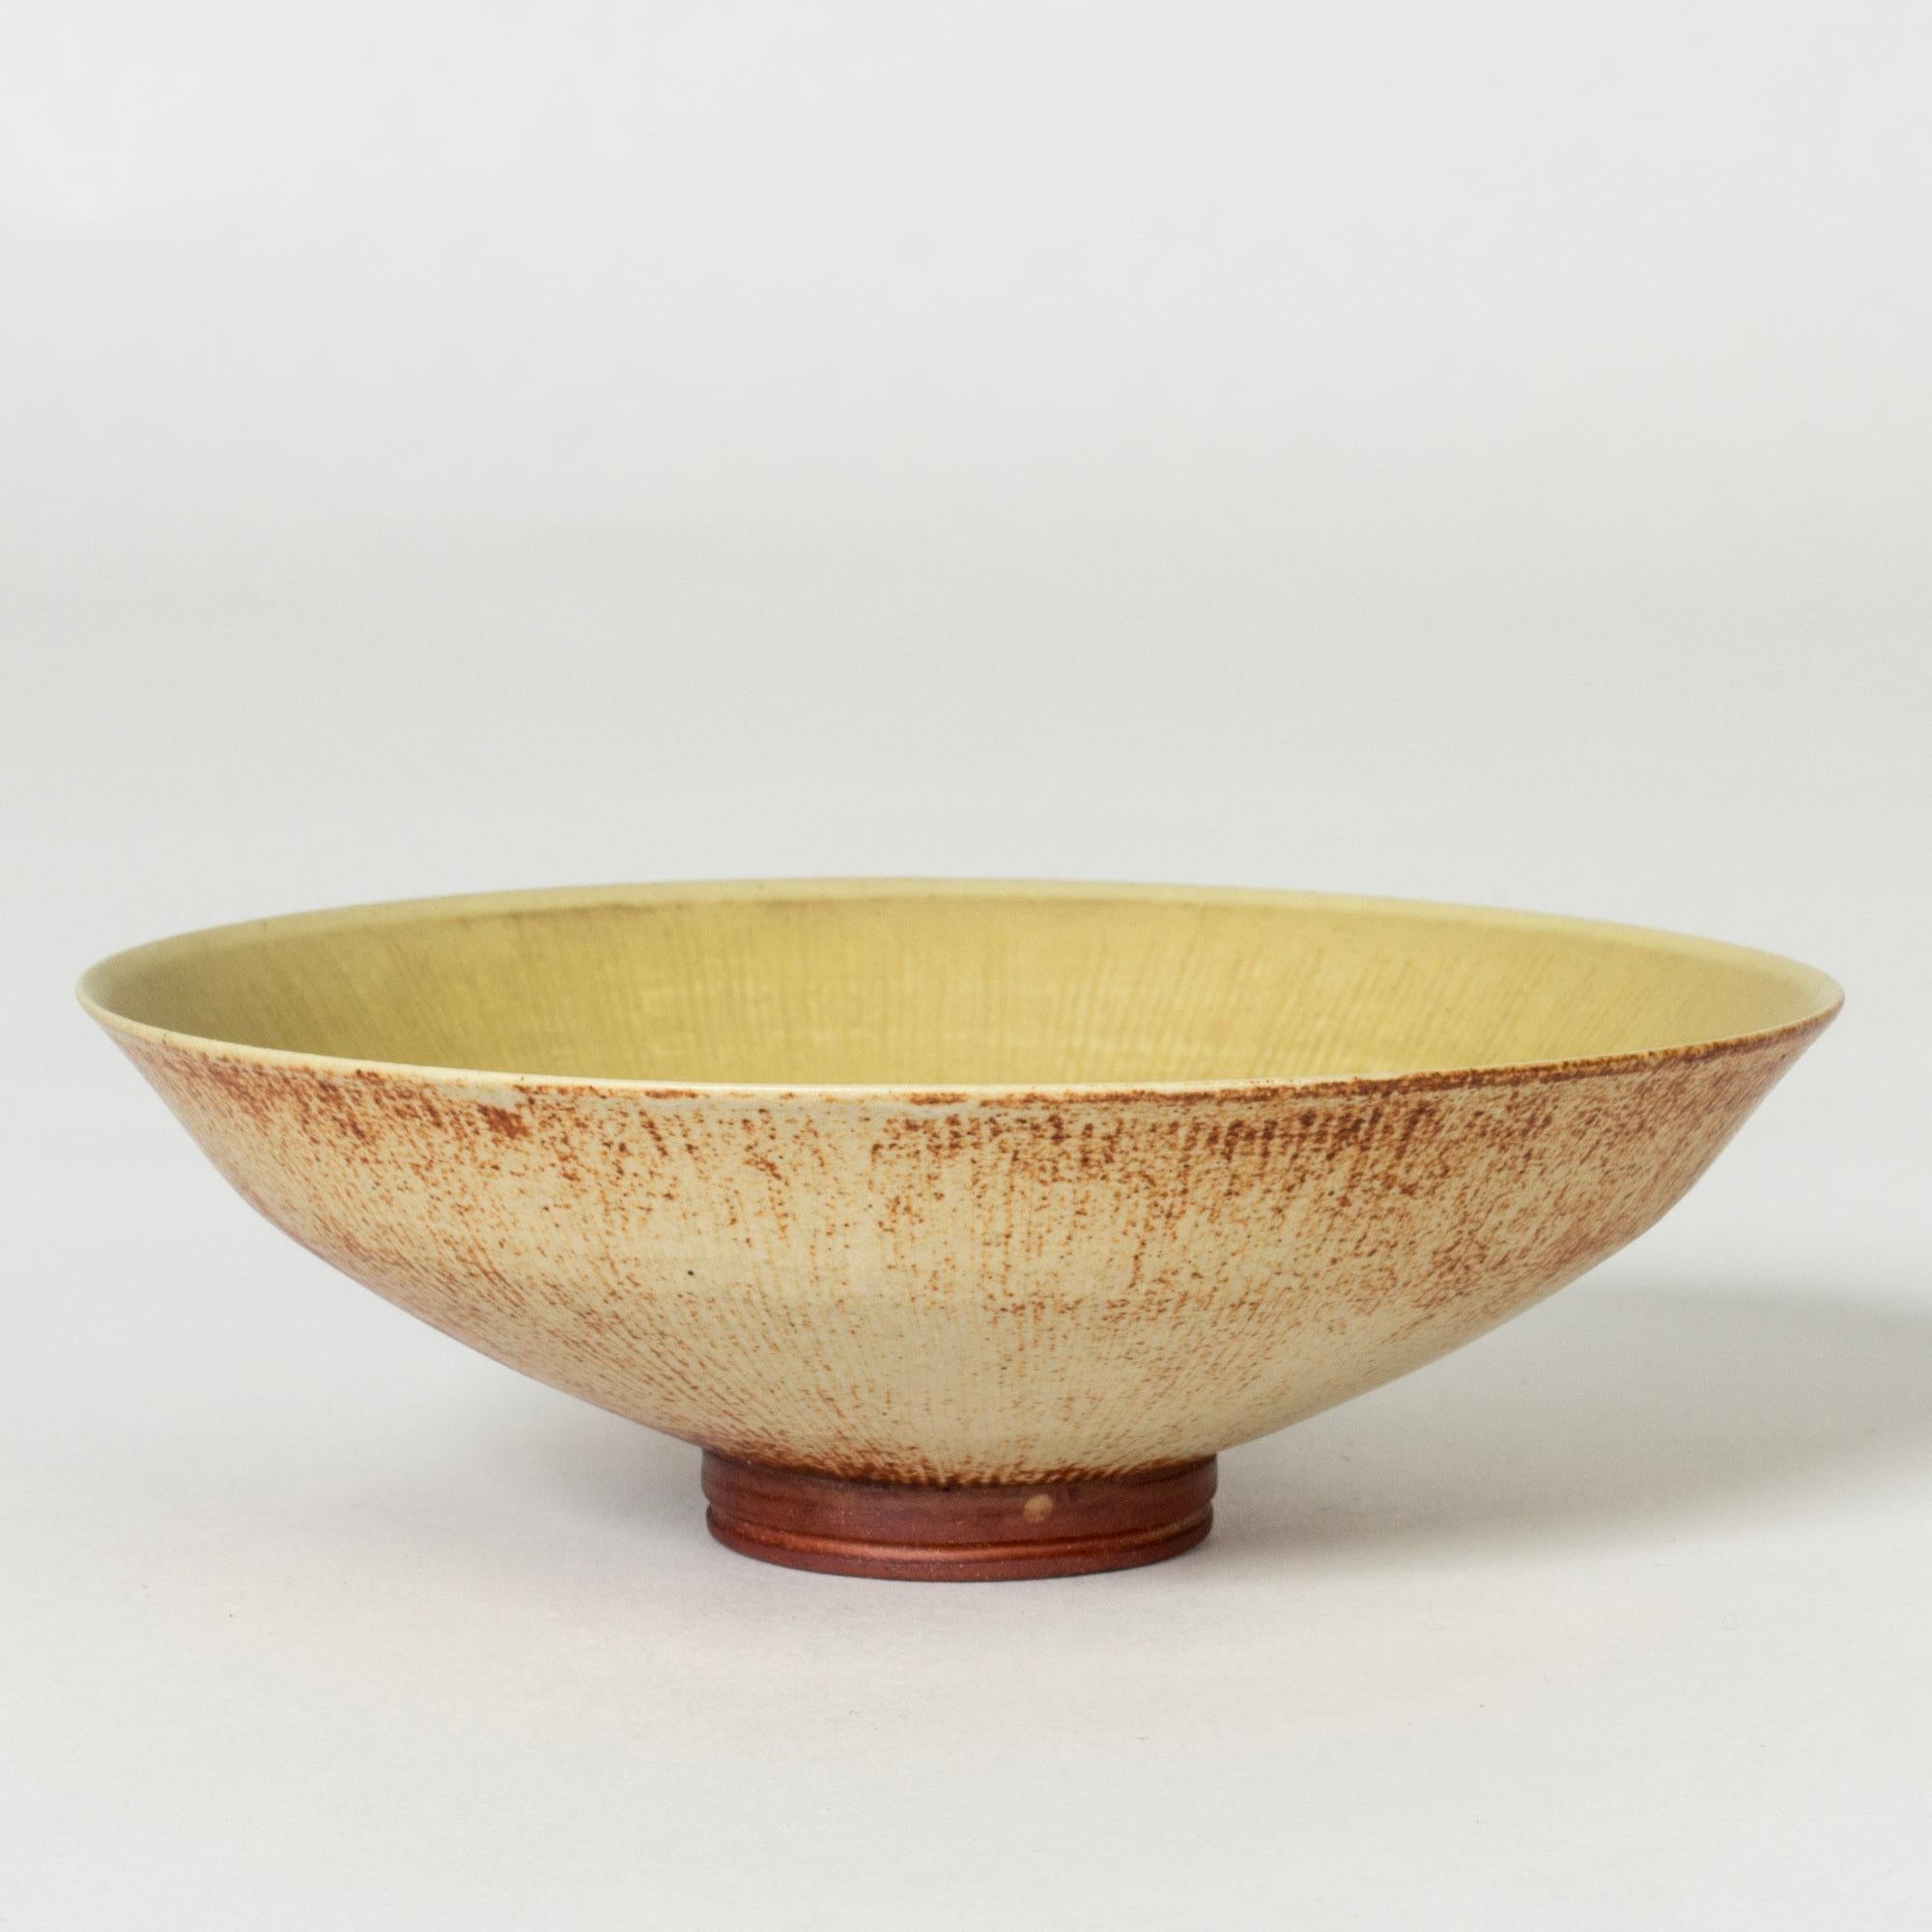 Beautiful “Farsta” bowl by Wilhelm Kåge, in delicate stoneware with natural tones. Yellow inside, outside with red streaks in a striking pattern.

“Farsta” stoneware is recognized as being the best and most exclusive that has come out of Swedish